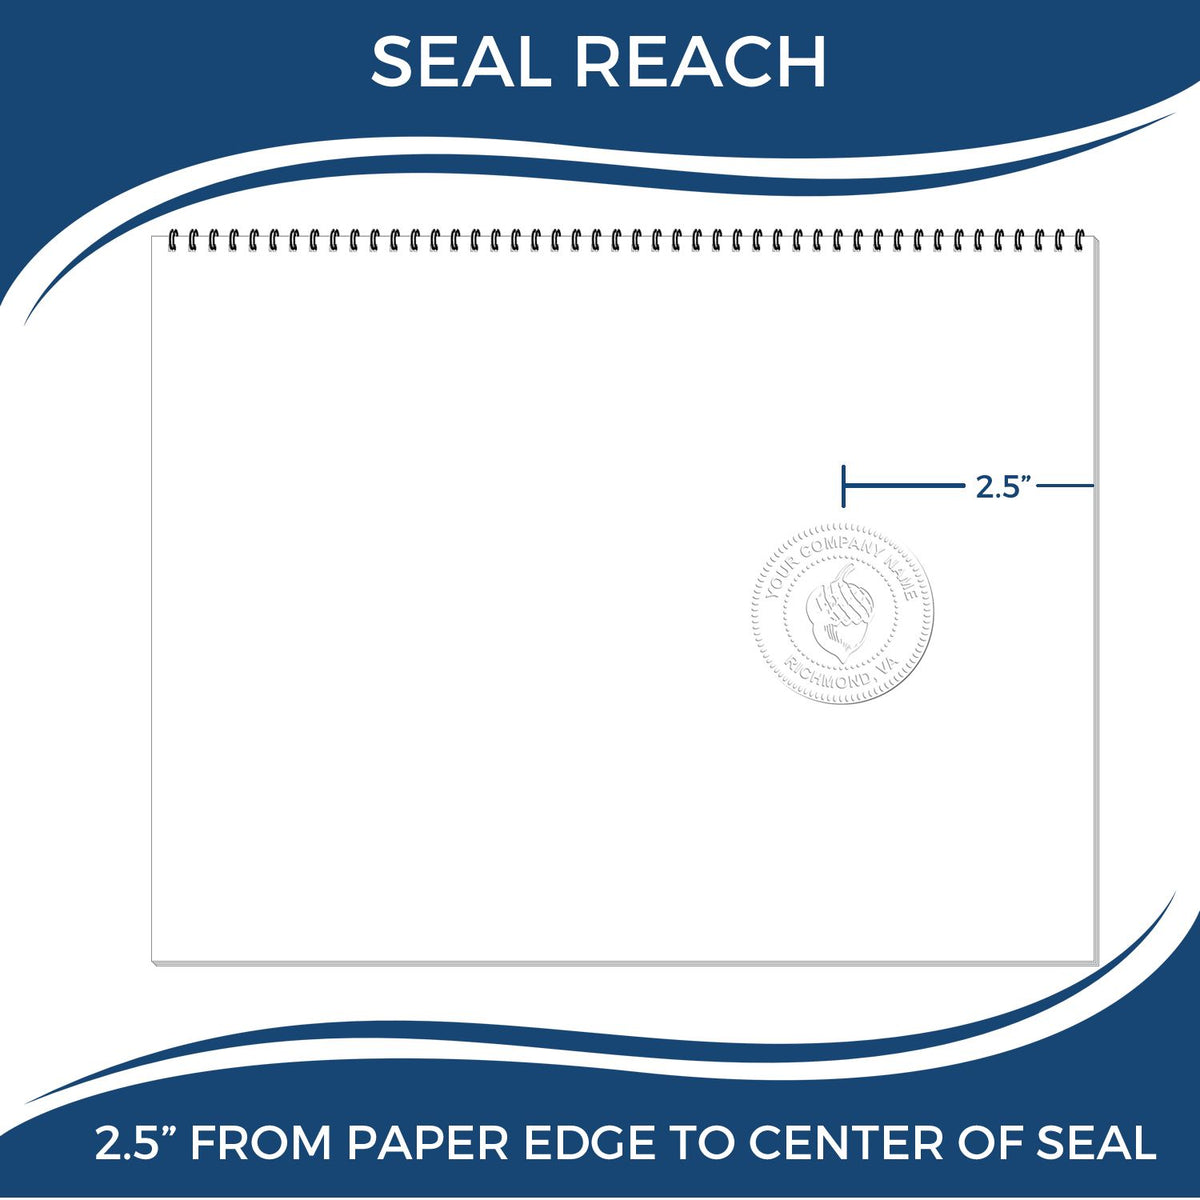 An infographic showing the seal reach which is represented by a ruler and a miniature seal image of the Long Reach New York PE Seal